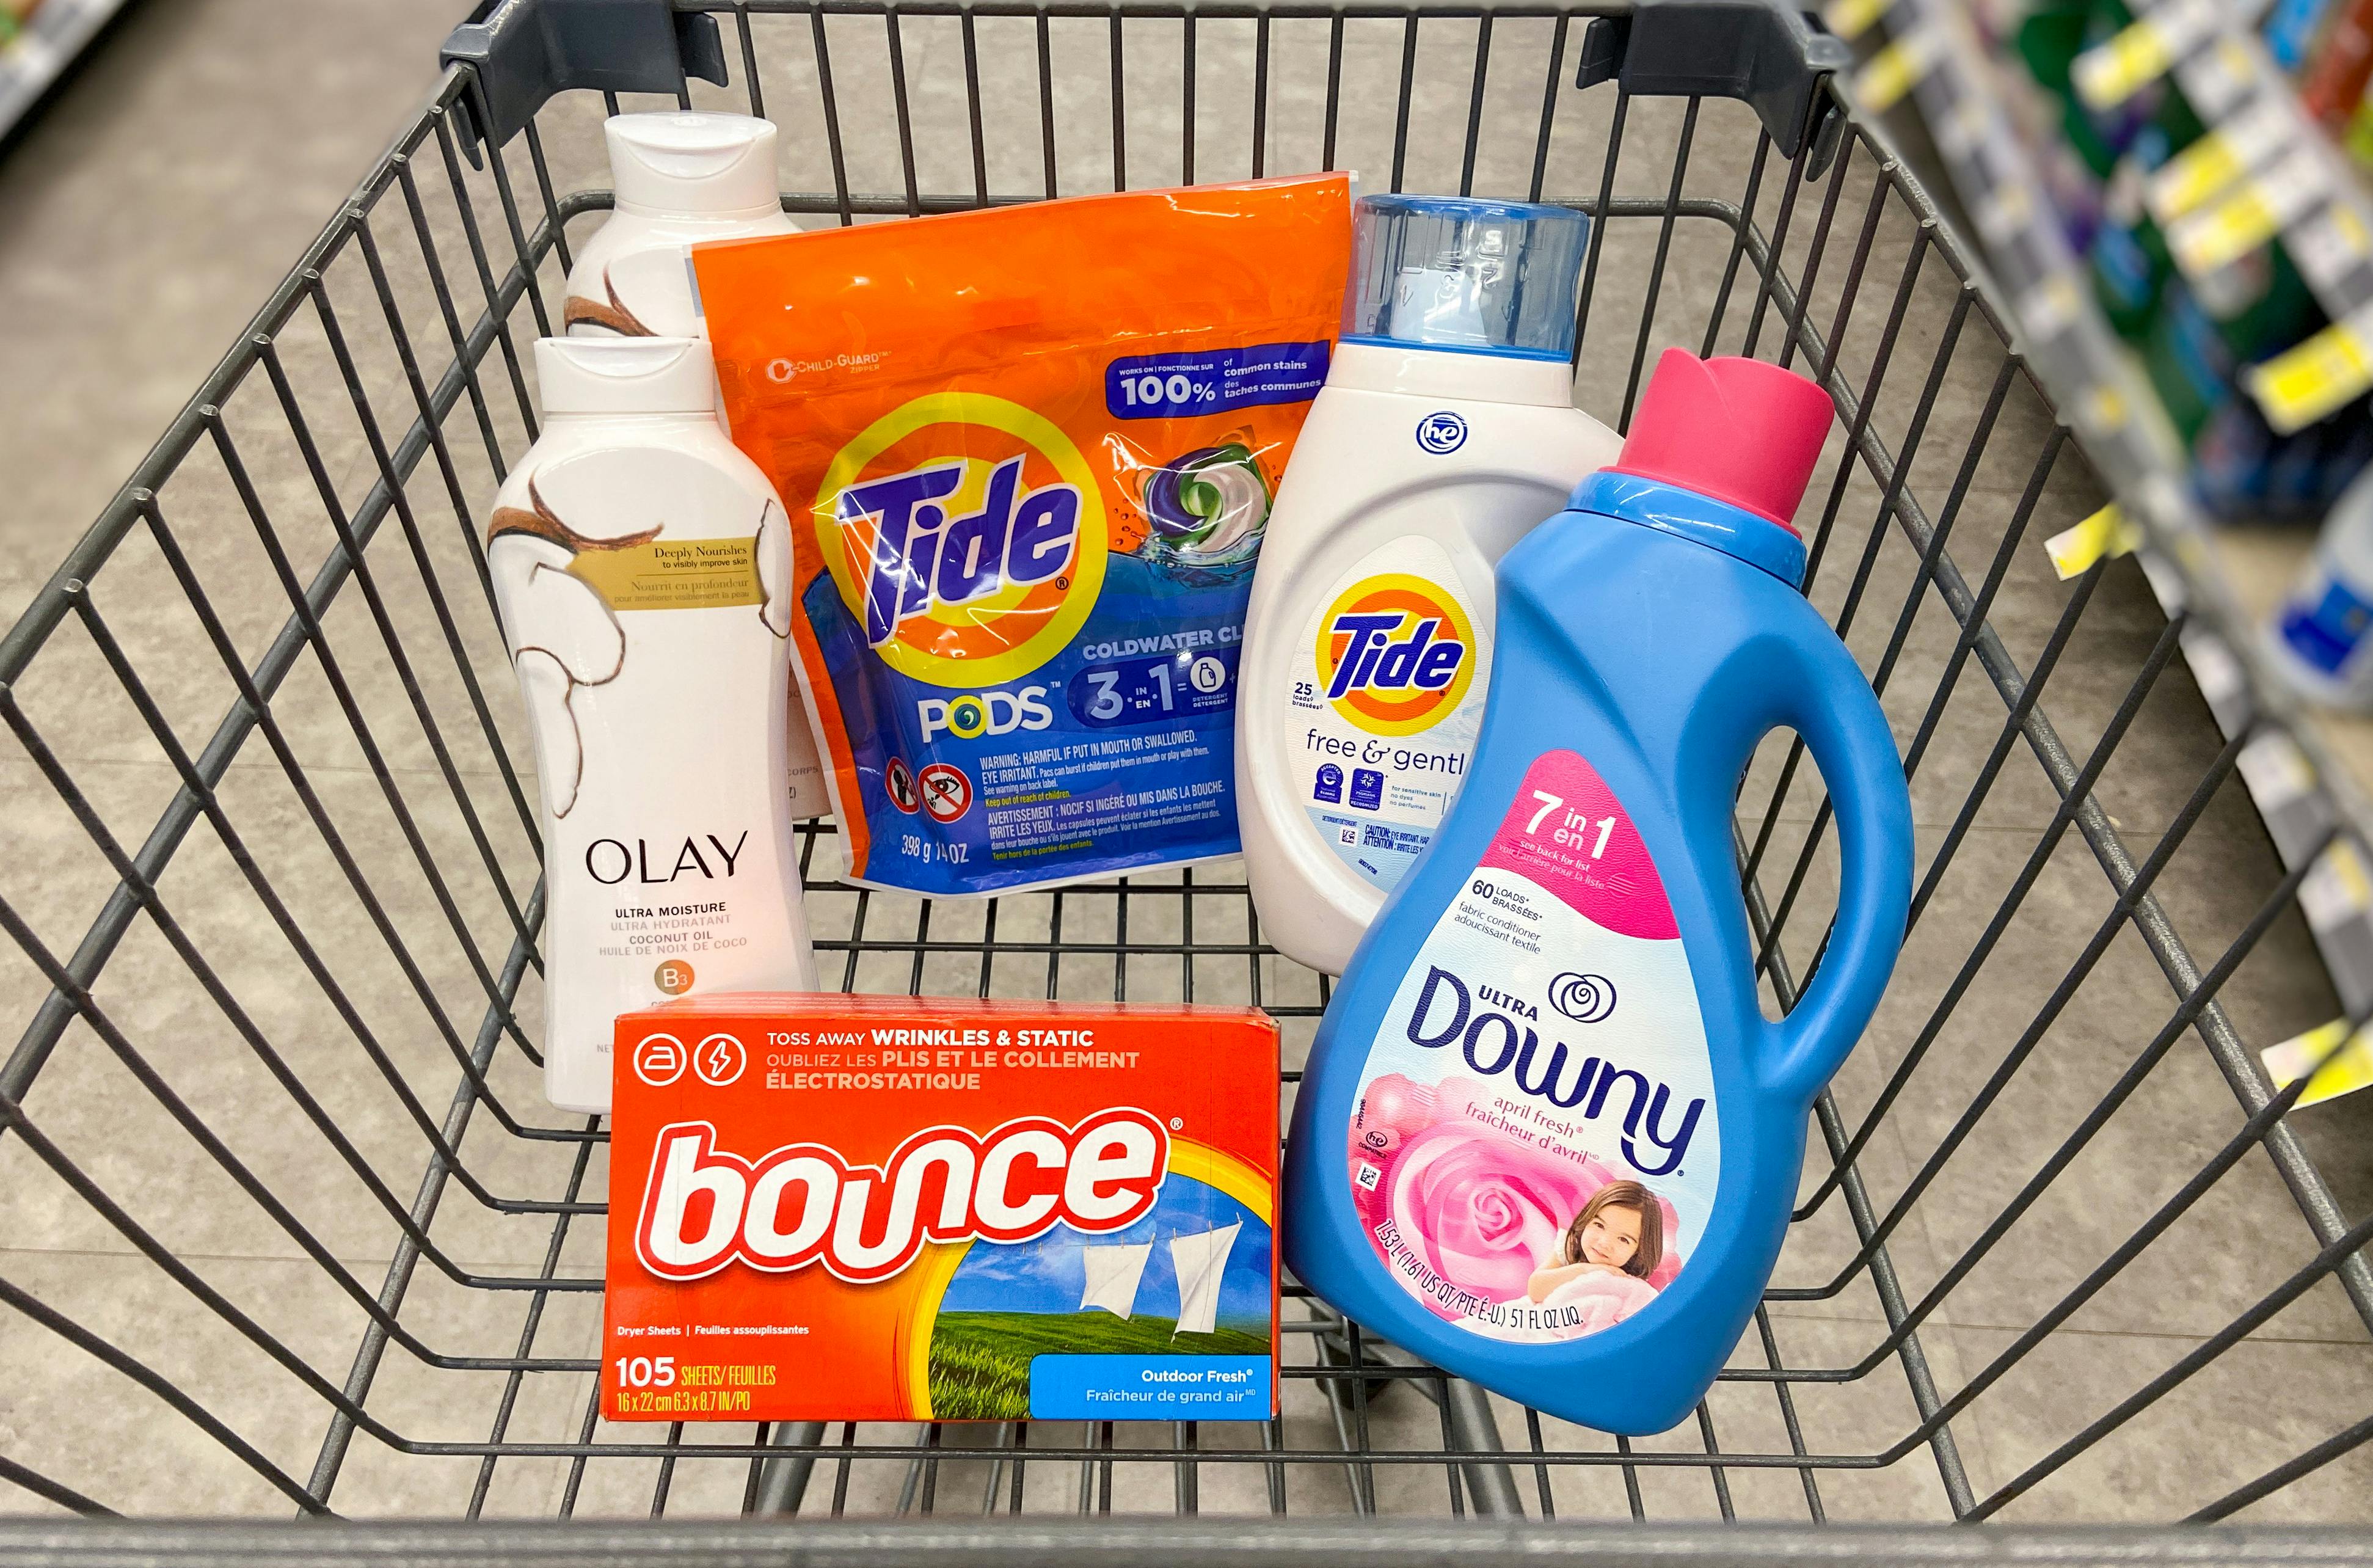 p-g-rebate-digital-walgreens-coupons-0-49-tide-downy-olay-the-krazy-coupon-lady